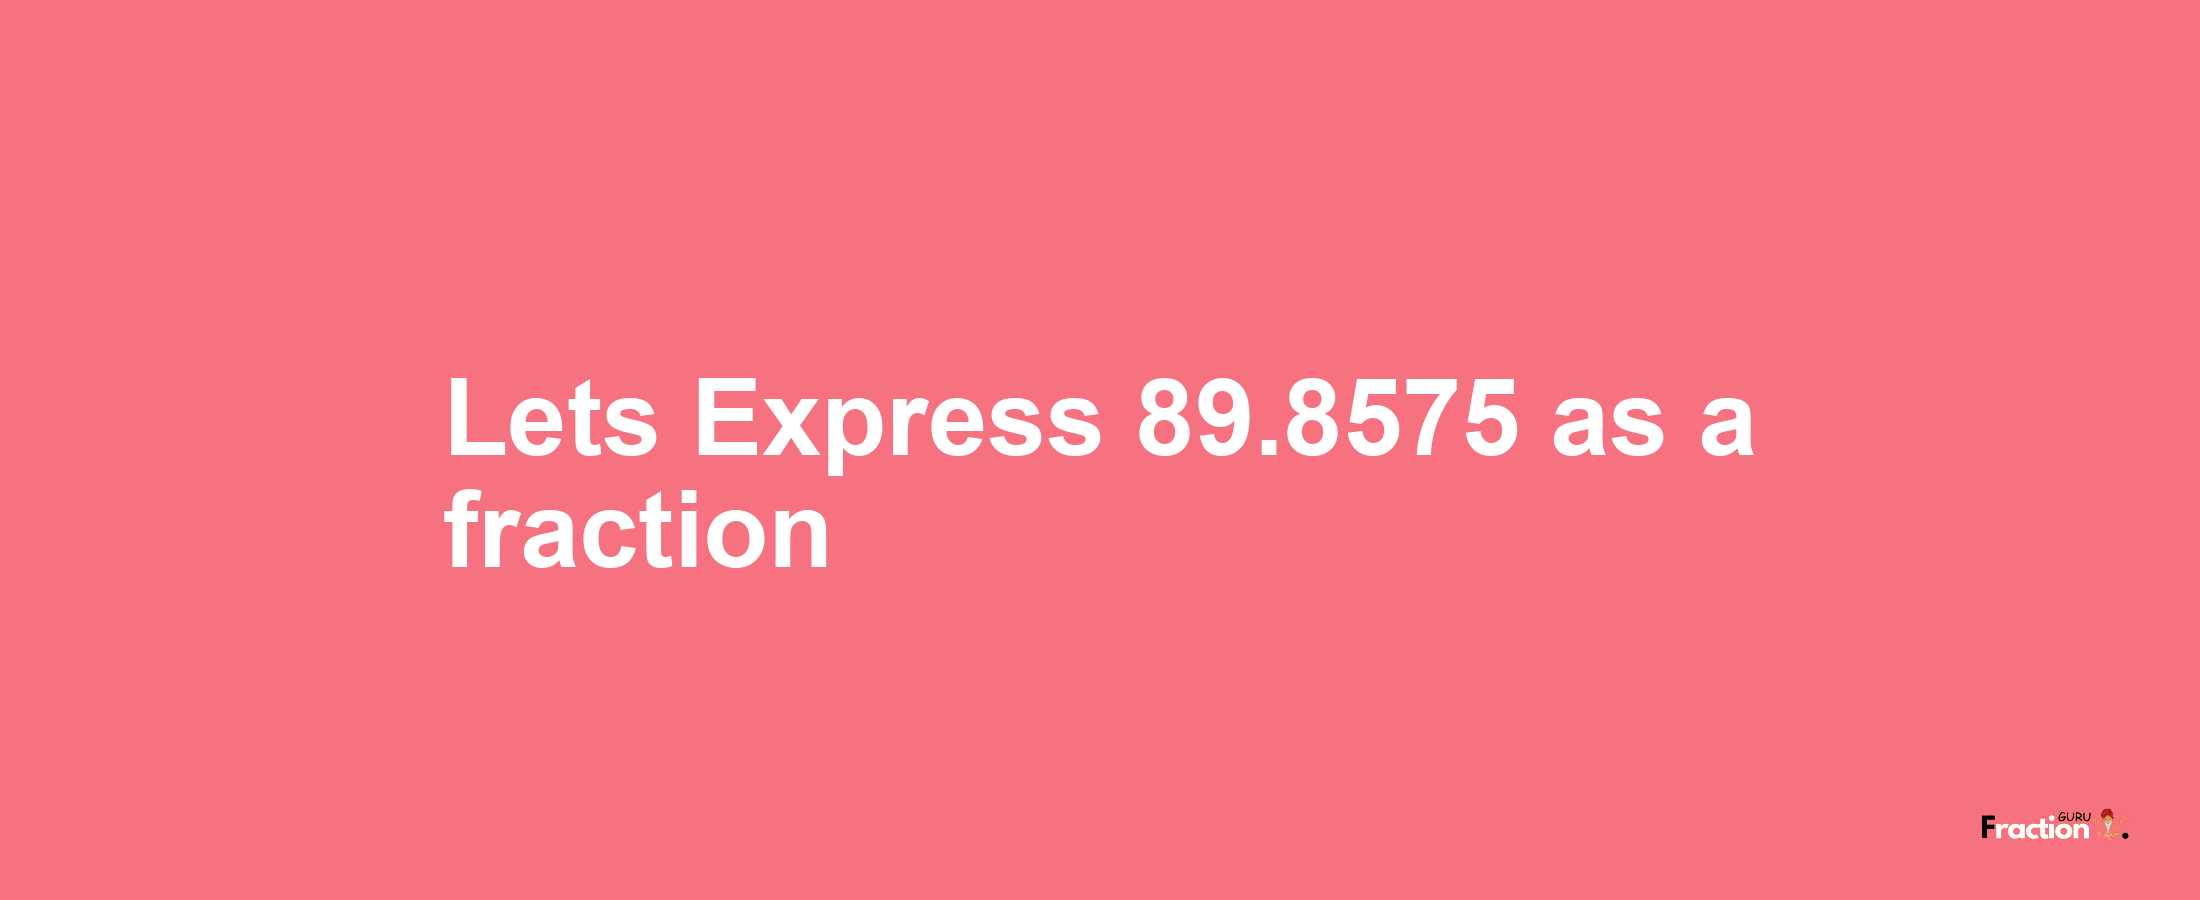 Lets Express 89.8575 as afraction